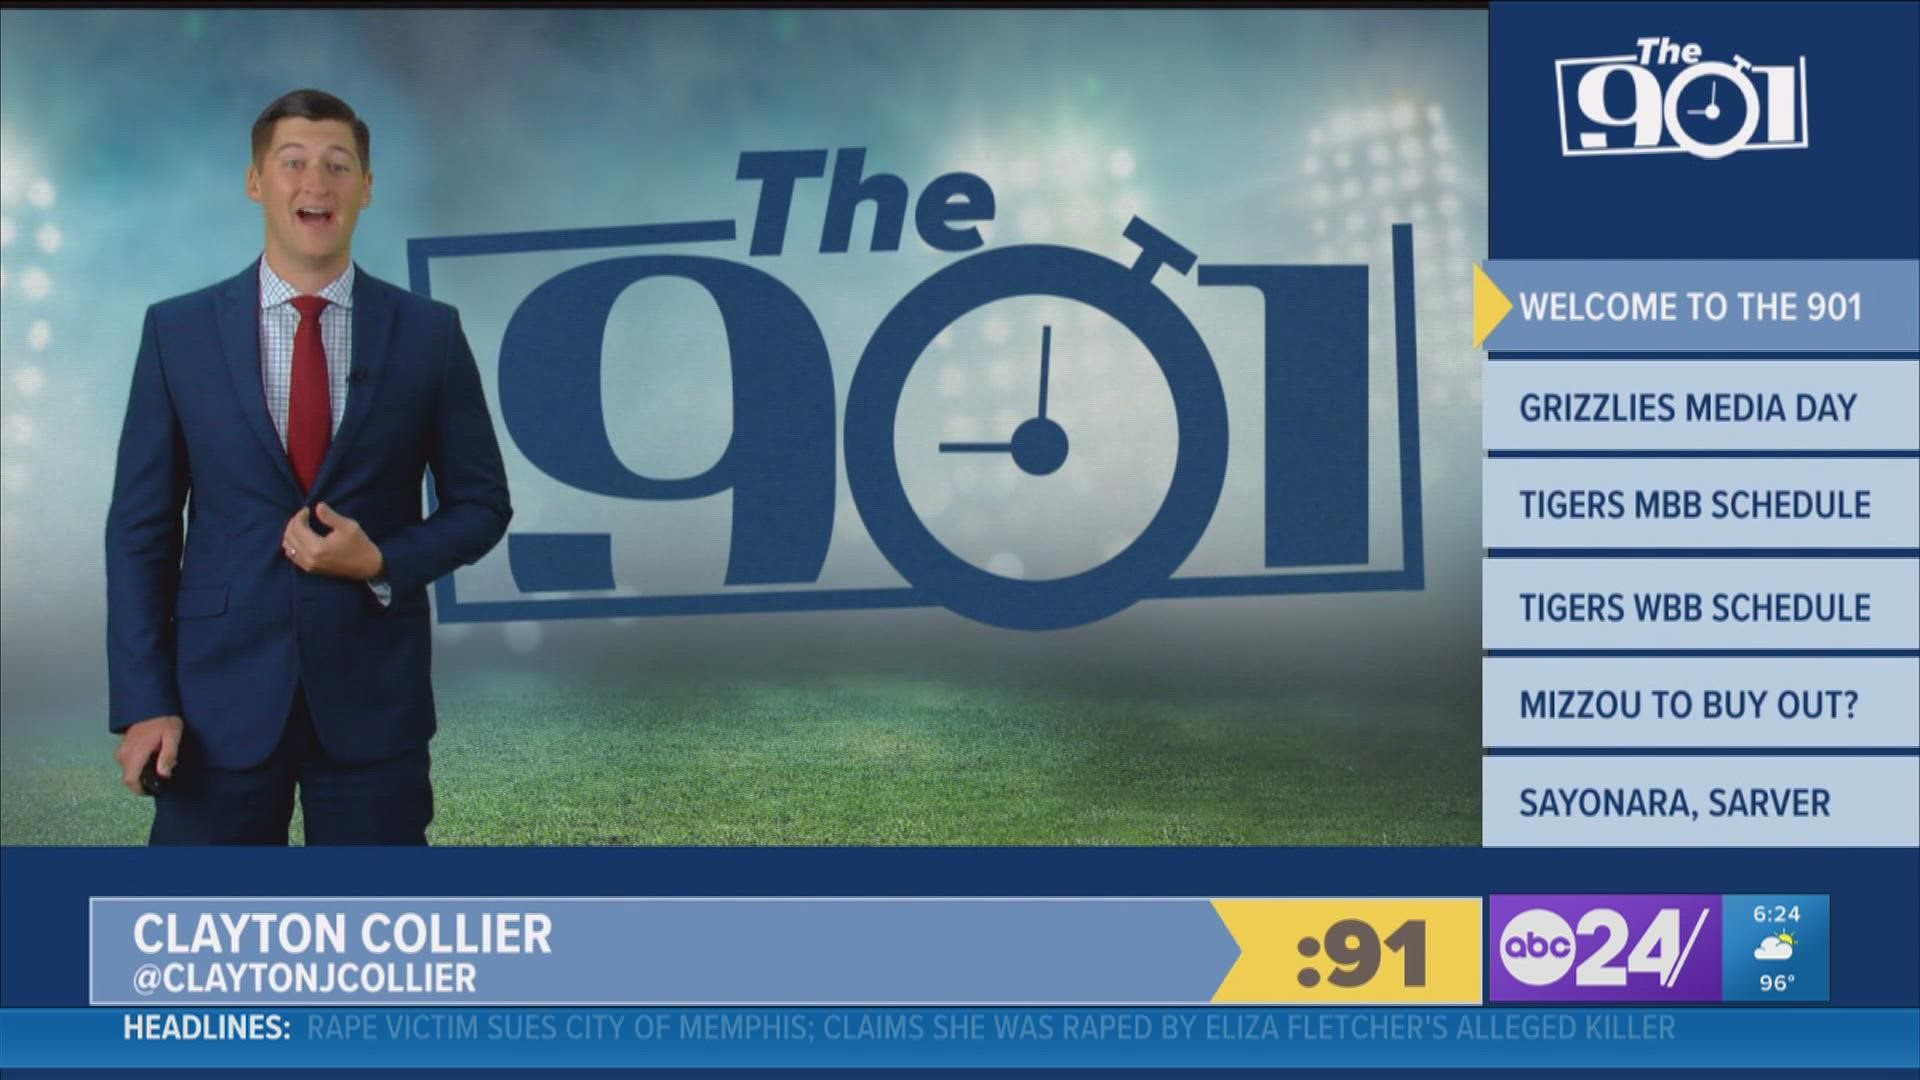 Clayton Collier breaks down everything you need to know about Memphis sports in Wednesday's episode of The 901.